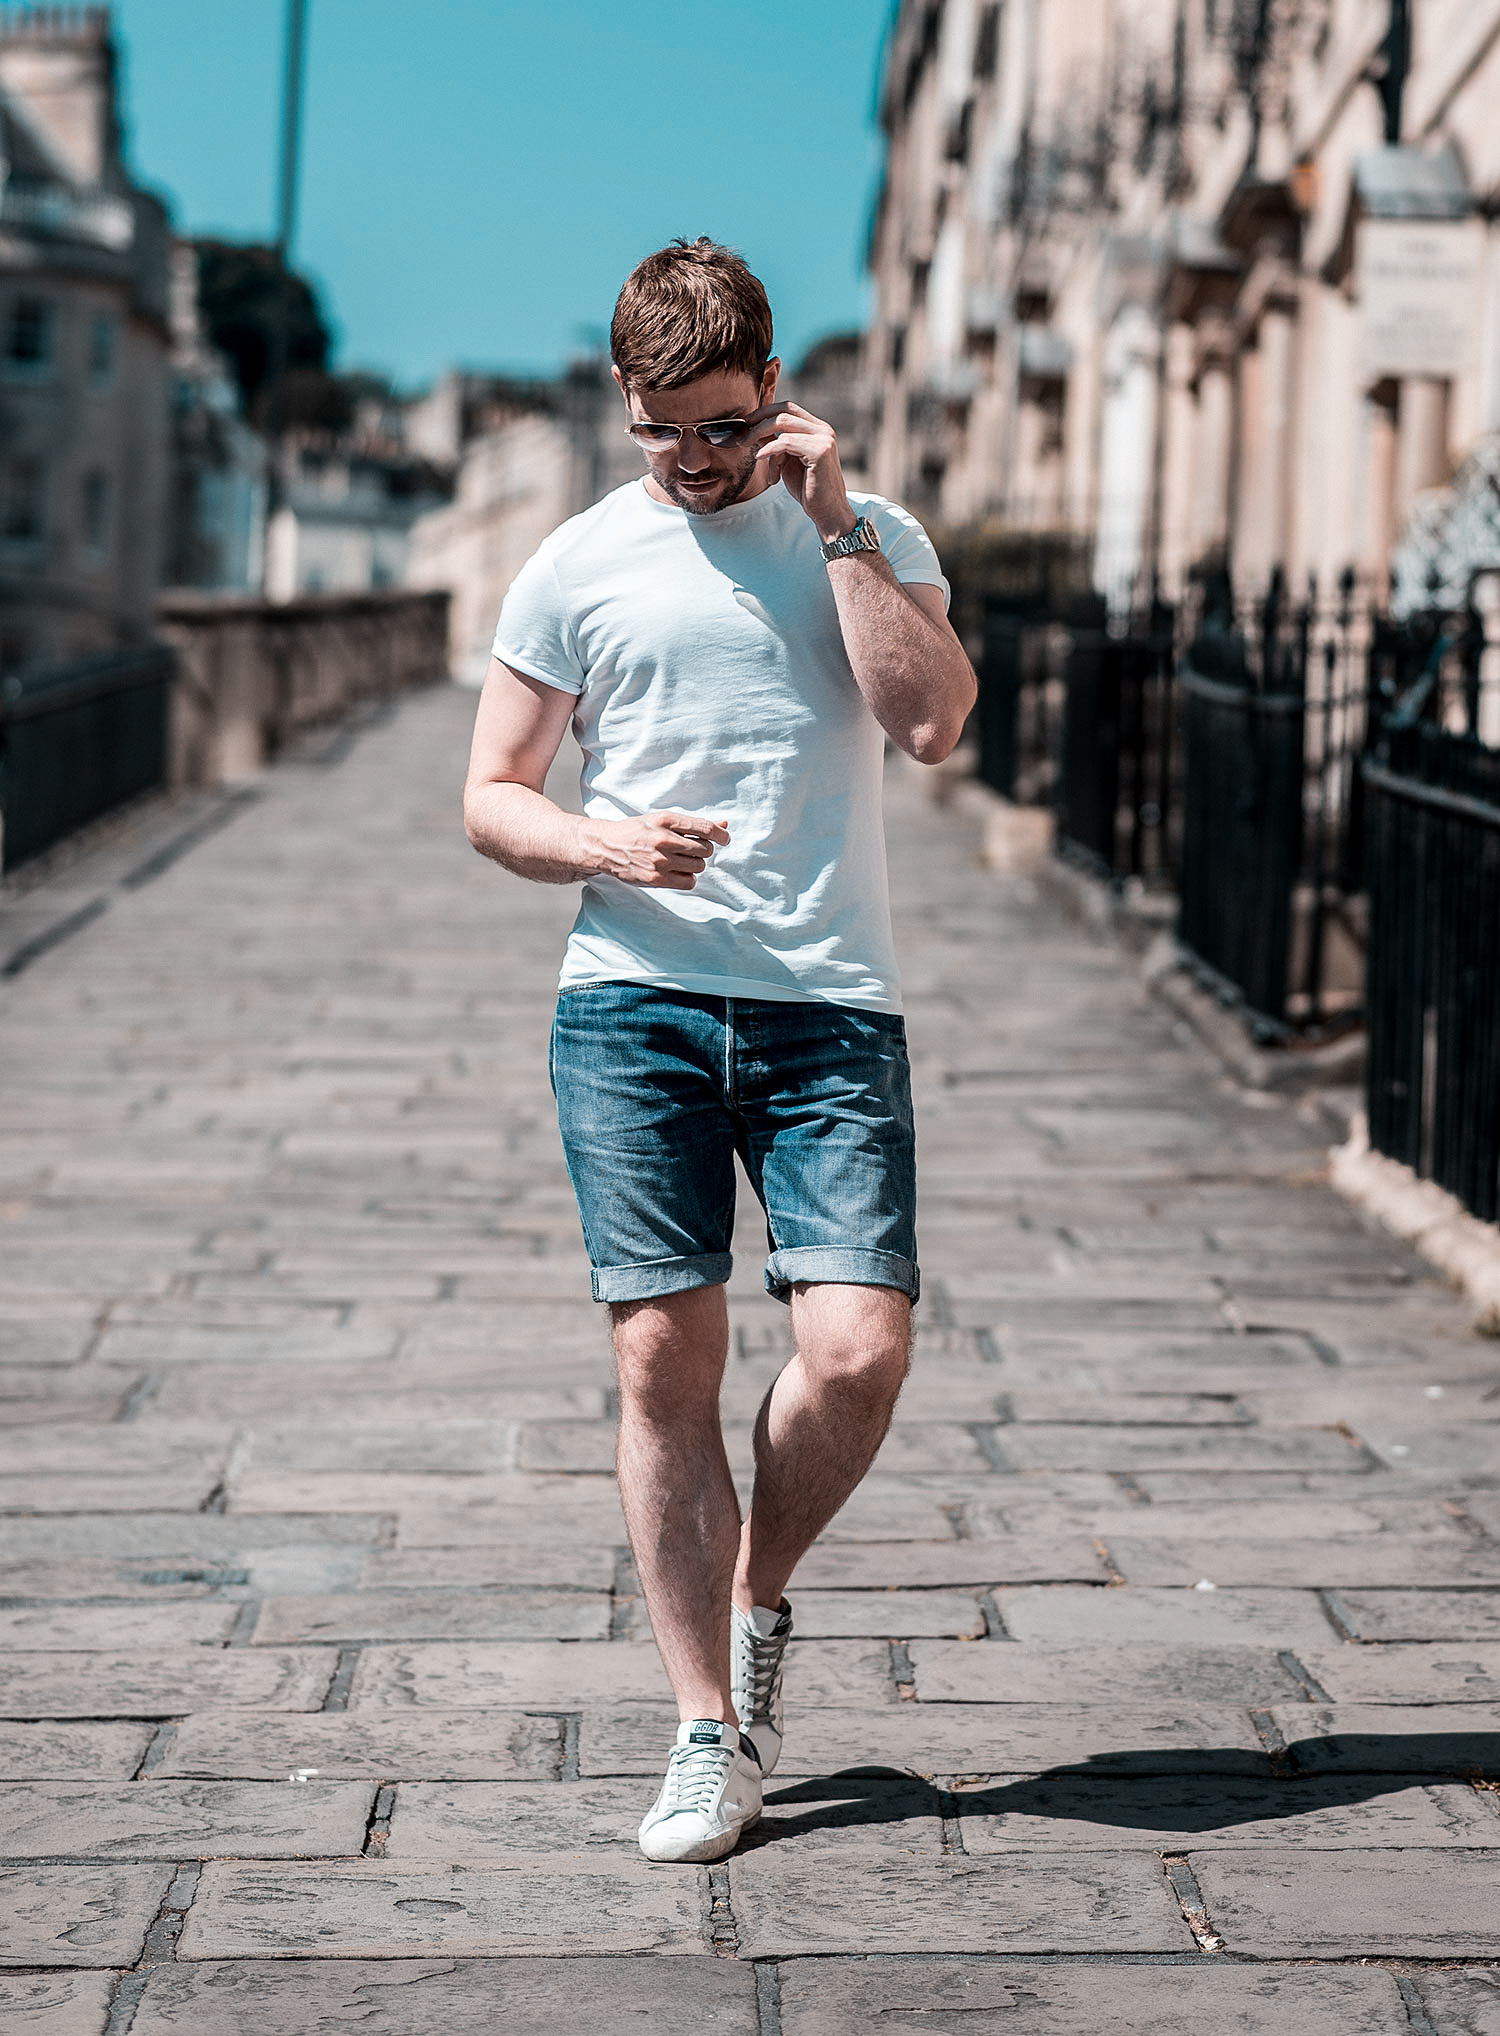 Summer Street Style Outfit With Denim Shorts Your Average Guy